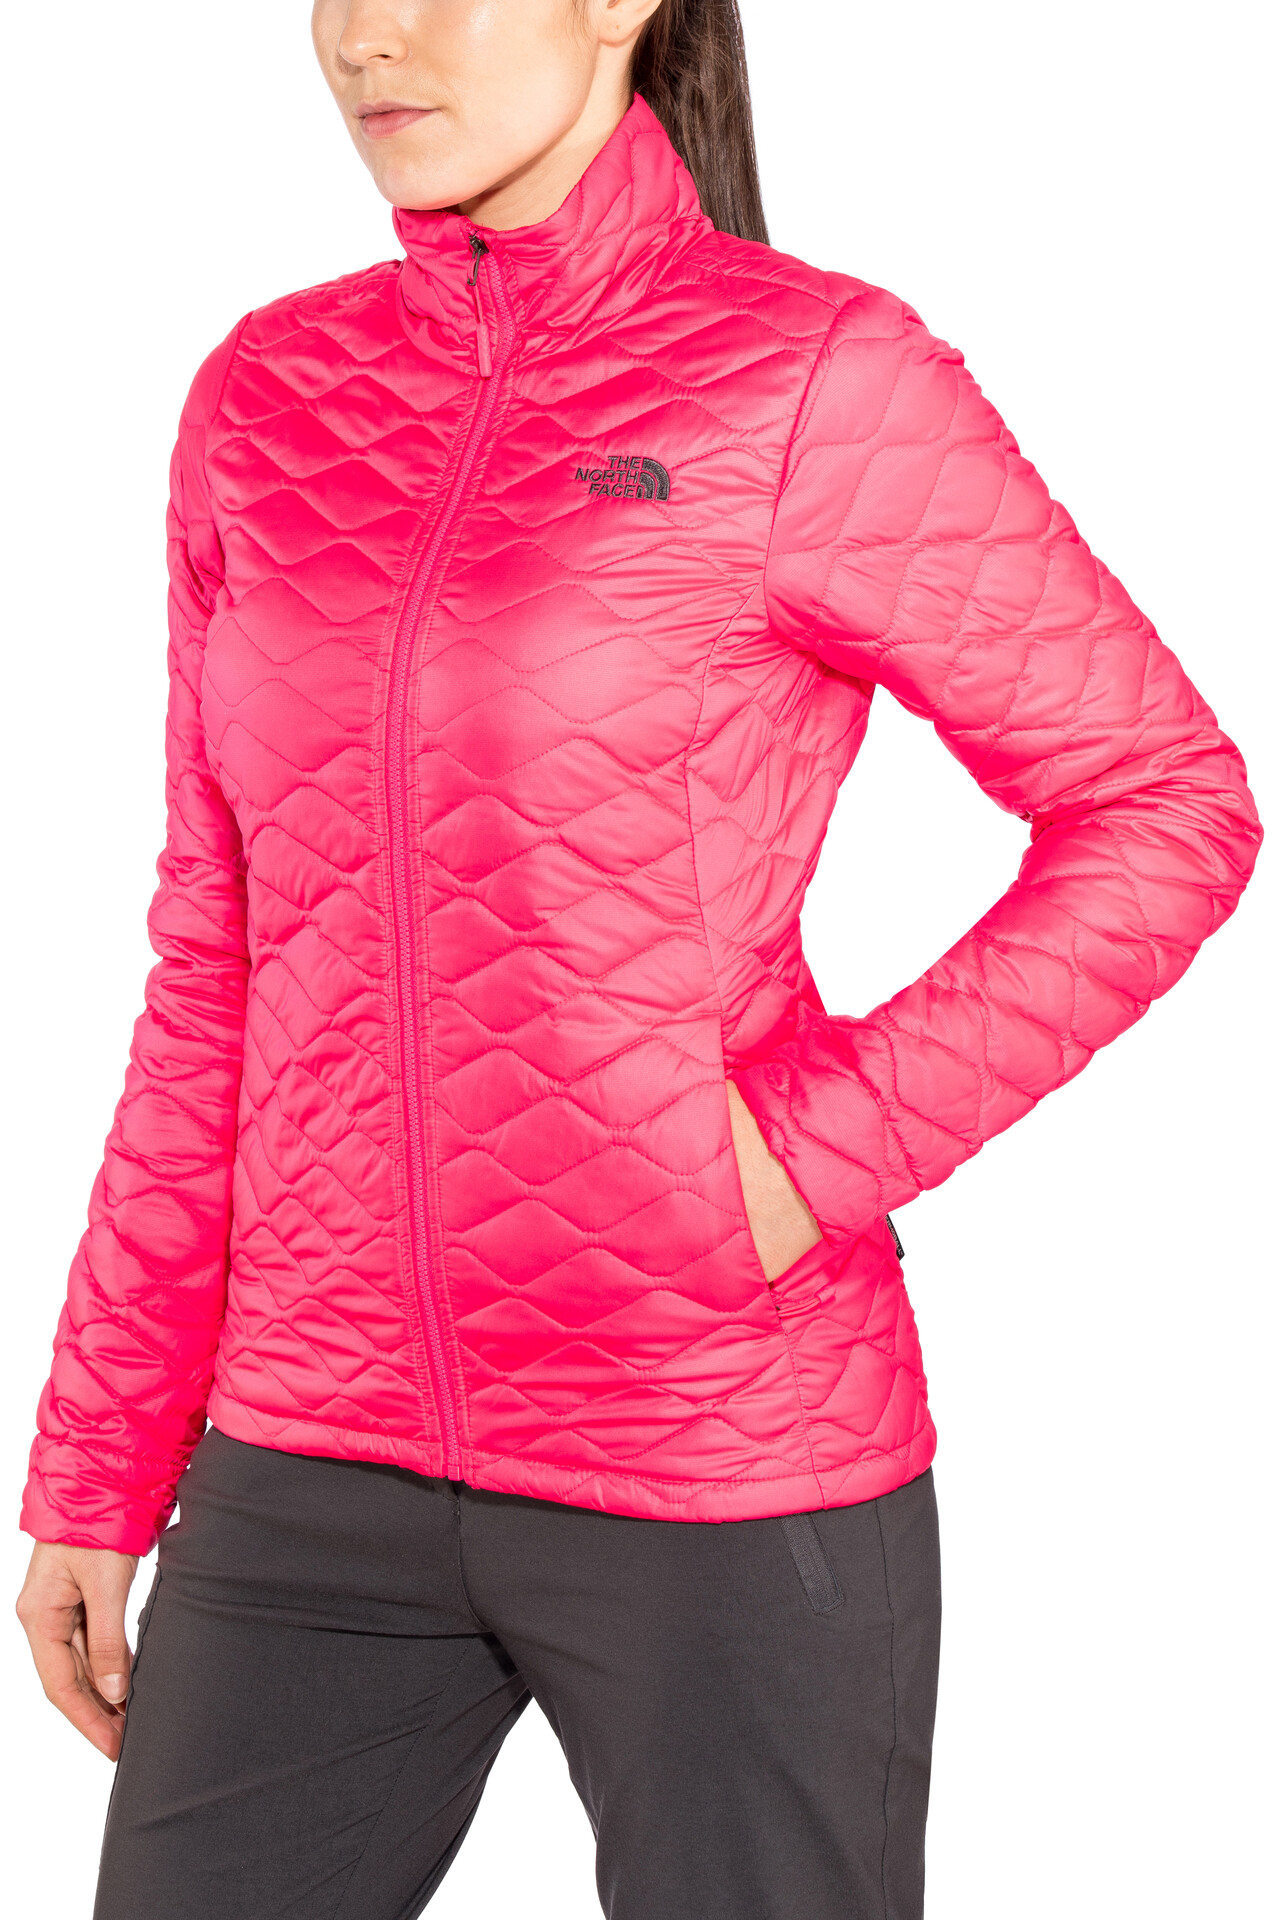 The North Face Thermoball Jacket Women 